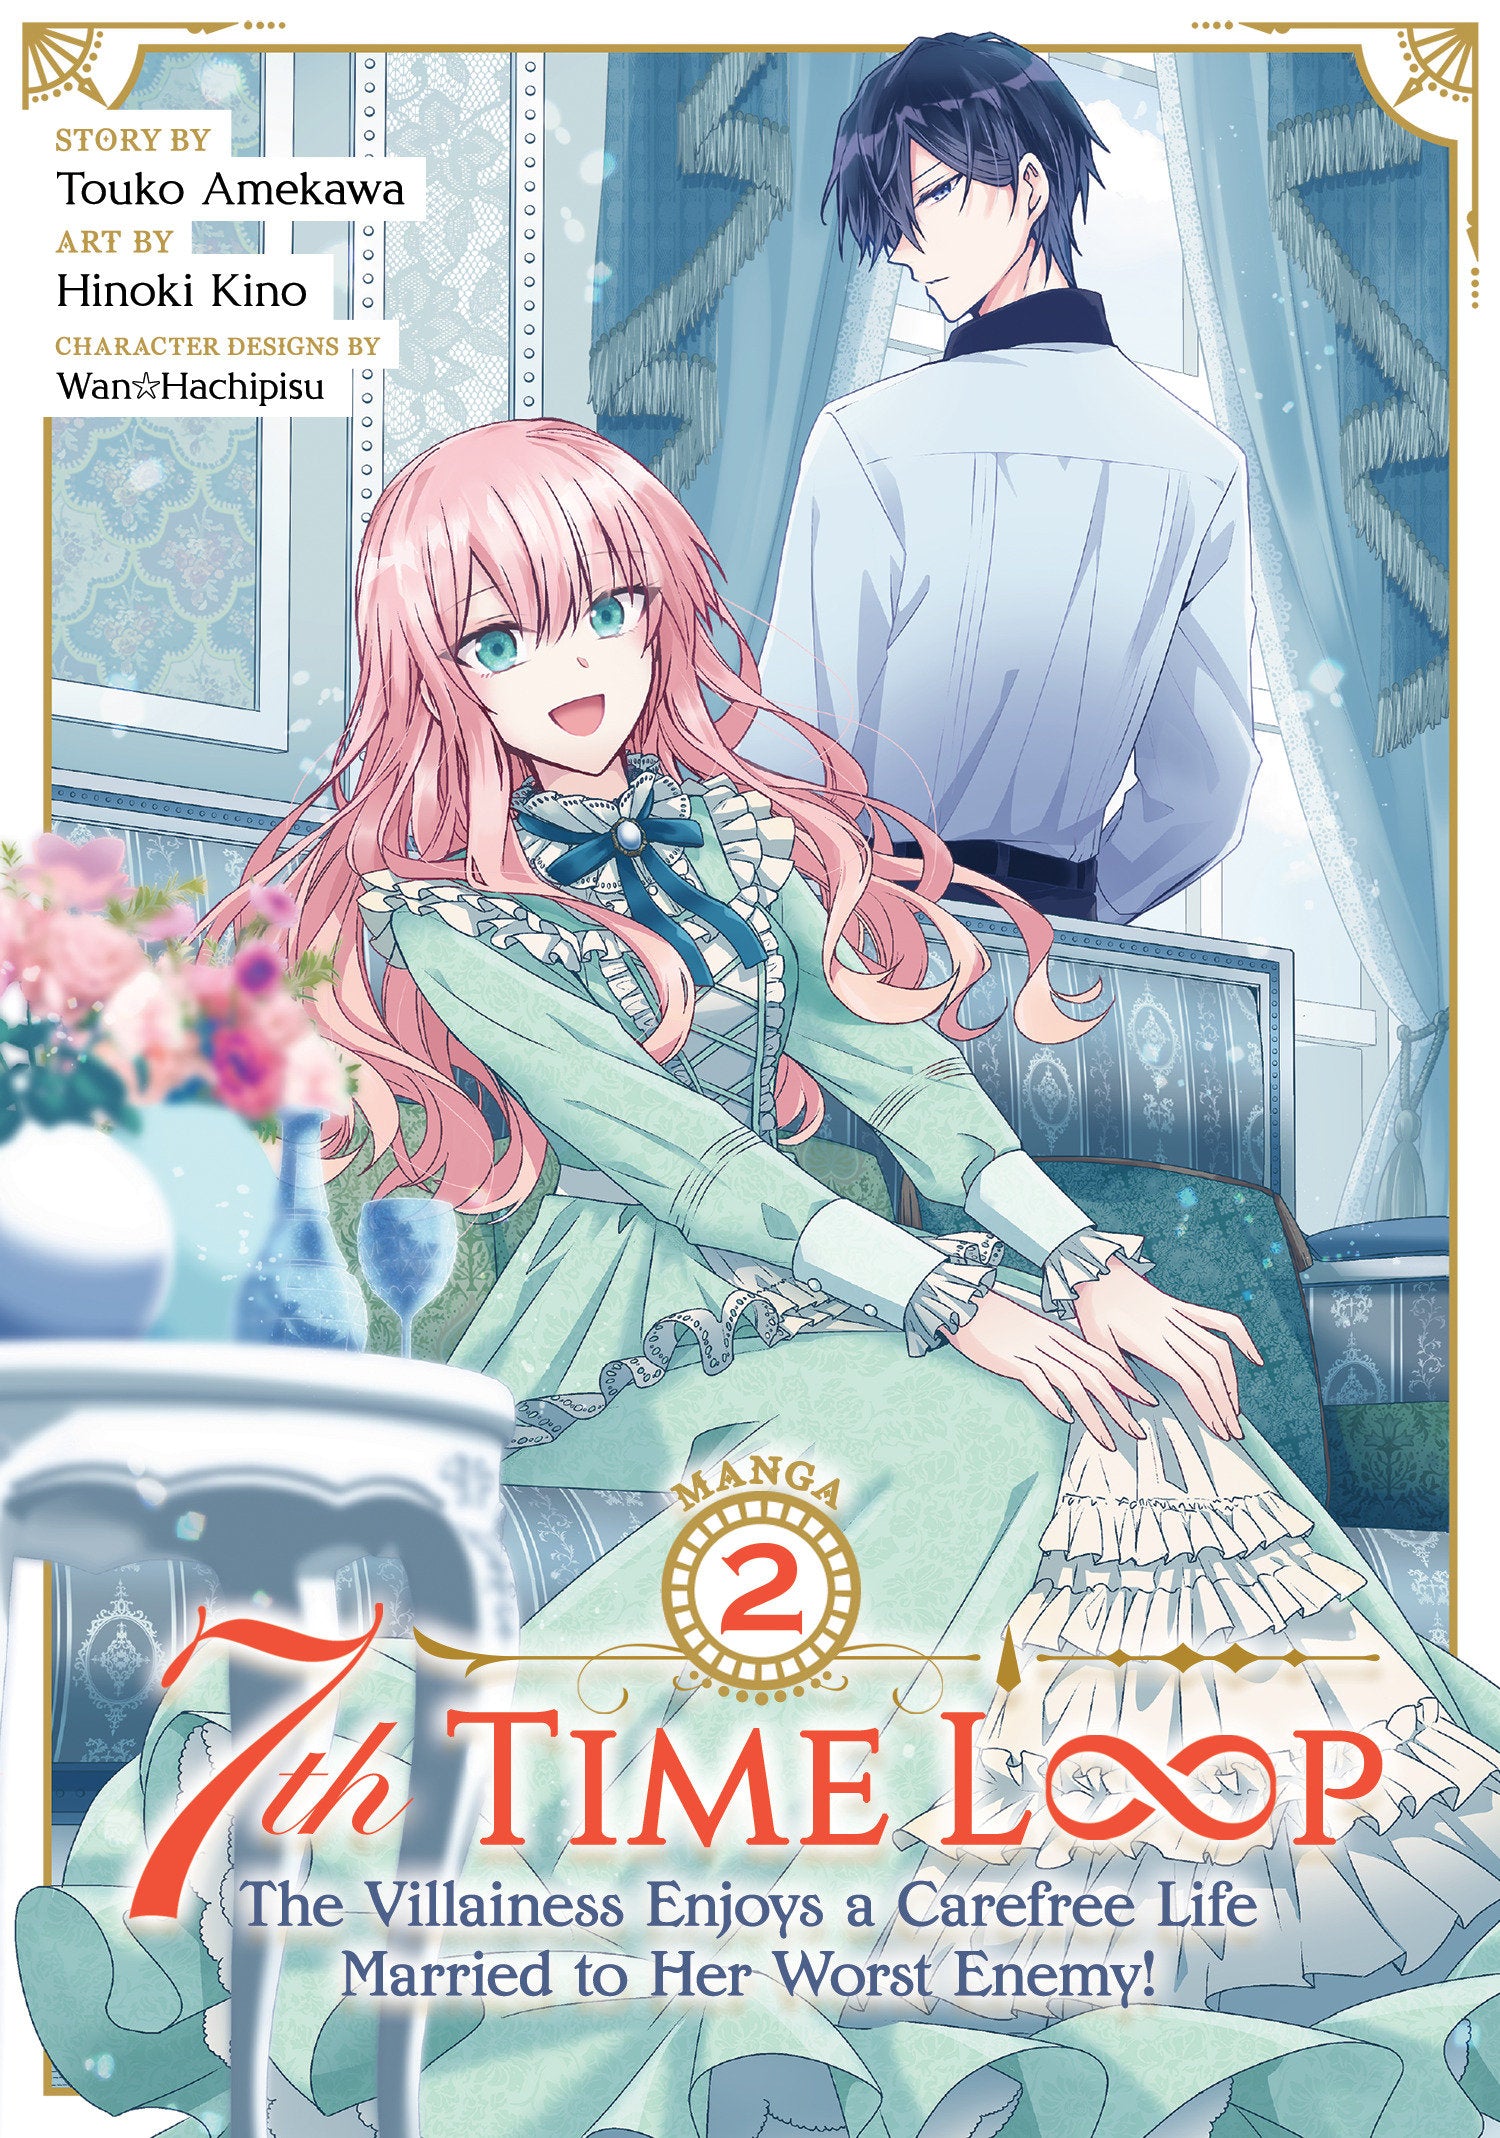 7th Time Loop: The Villainess Enjoys a Carefree Life Married to Her Worst Enemy! (Manga) Vol. 02